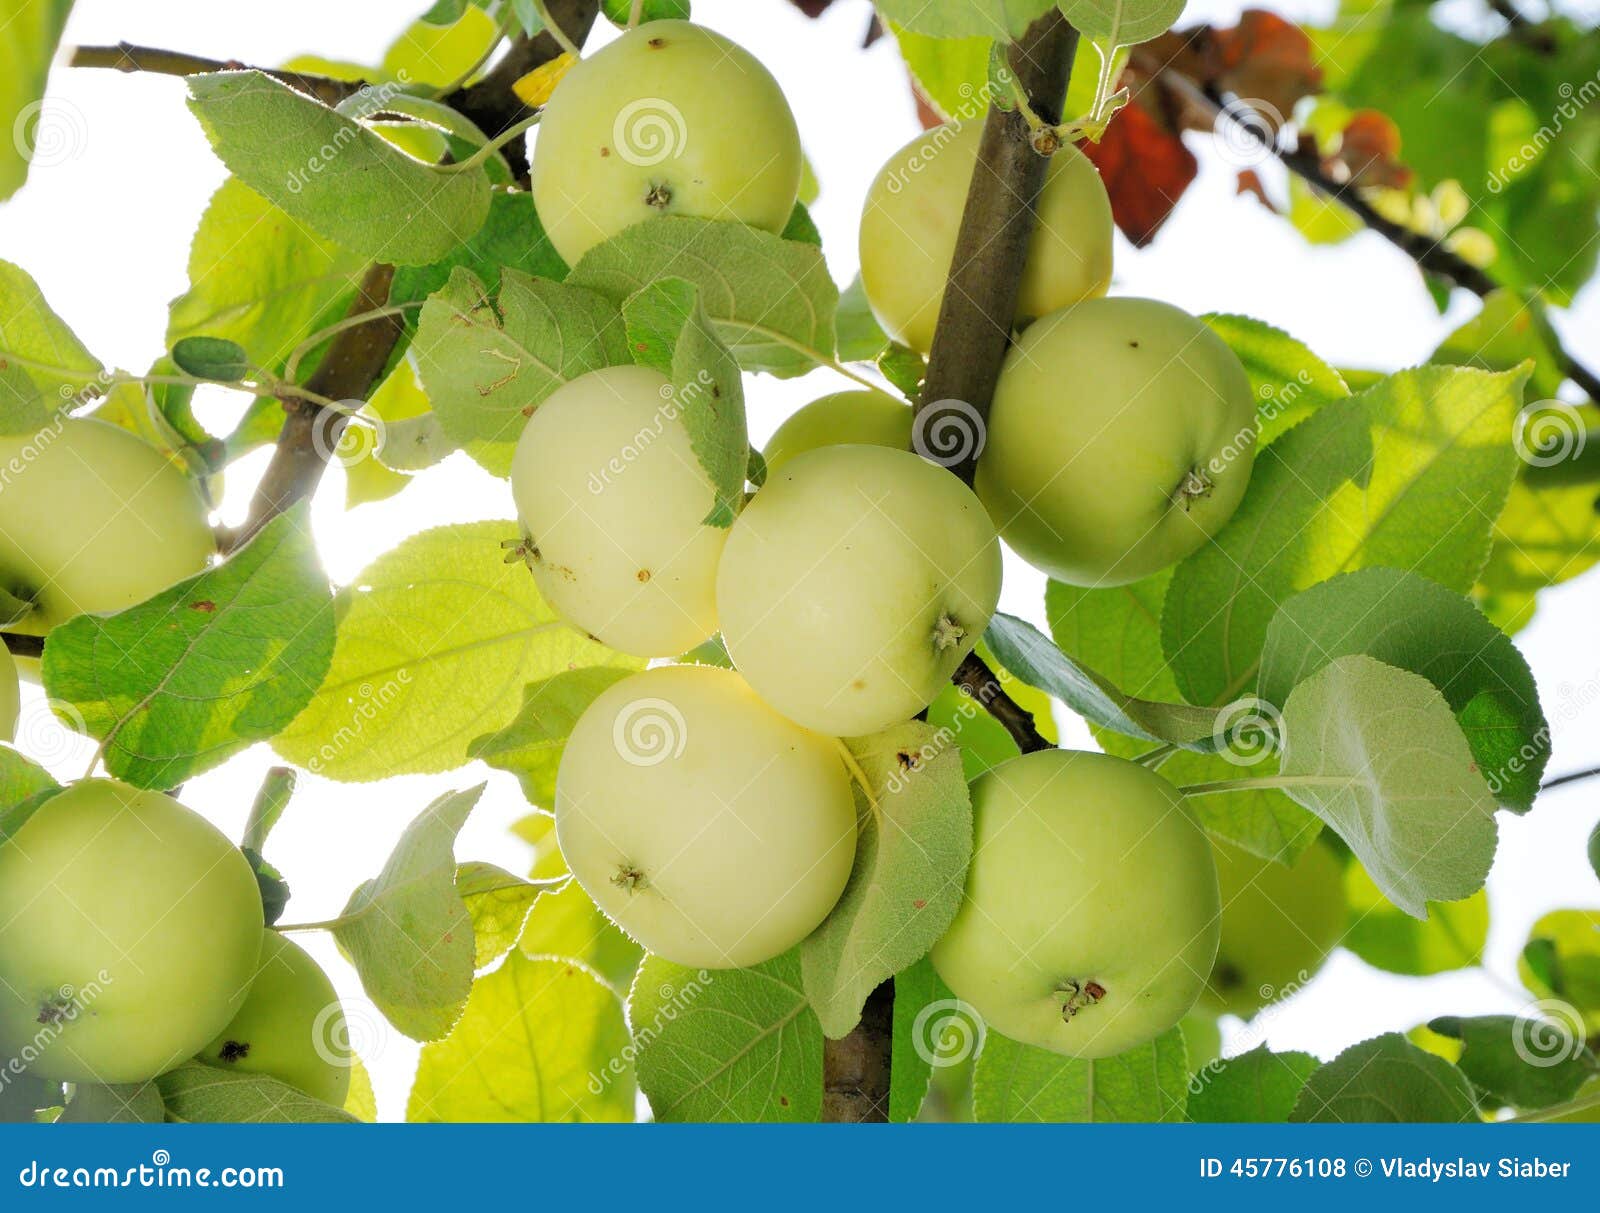 grope of white apples on the branch